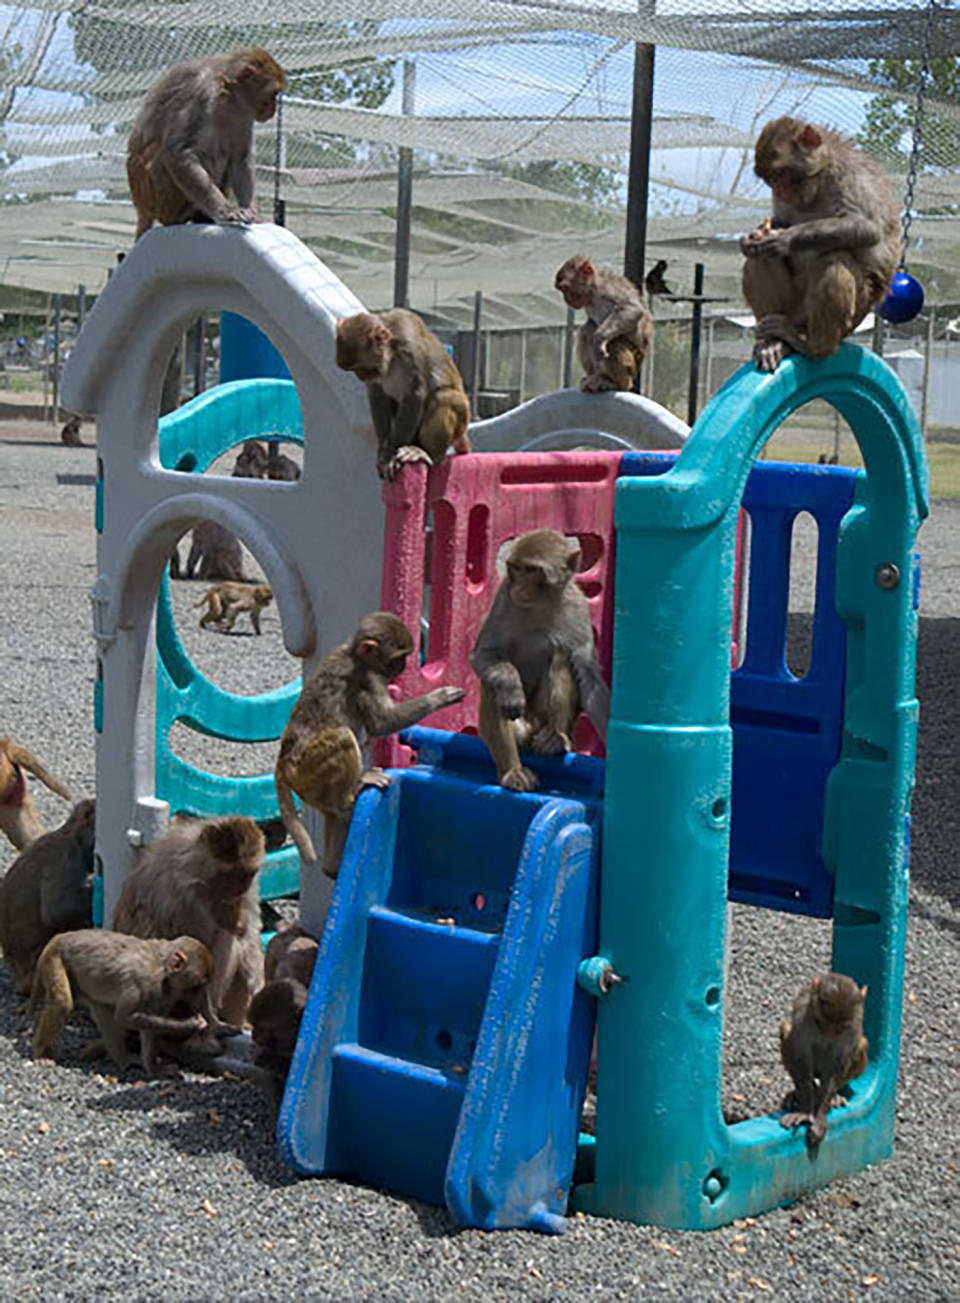 In this undated photo provided by the California National Primate Research Center, rhesus monkeys are seen in their outdoor enclosure at the California National Primate Research Center in Davis, Calif. A group of the animals exposed to wildfire smoke as infants have developed lungs that are about 20 percent smaller than other rhesus monkeys. (California National Primate Research Center/University California Davis via AP)